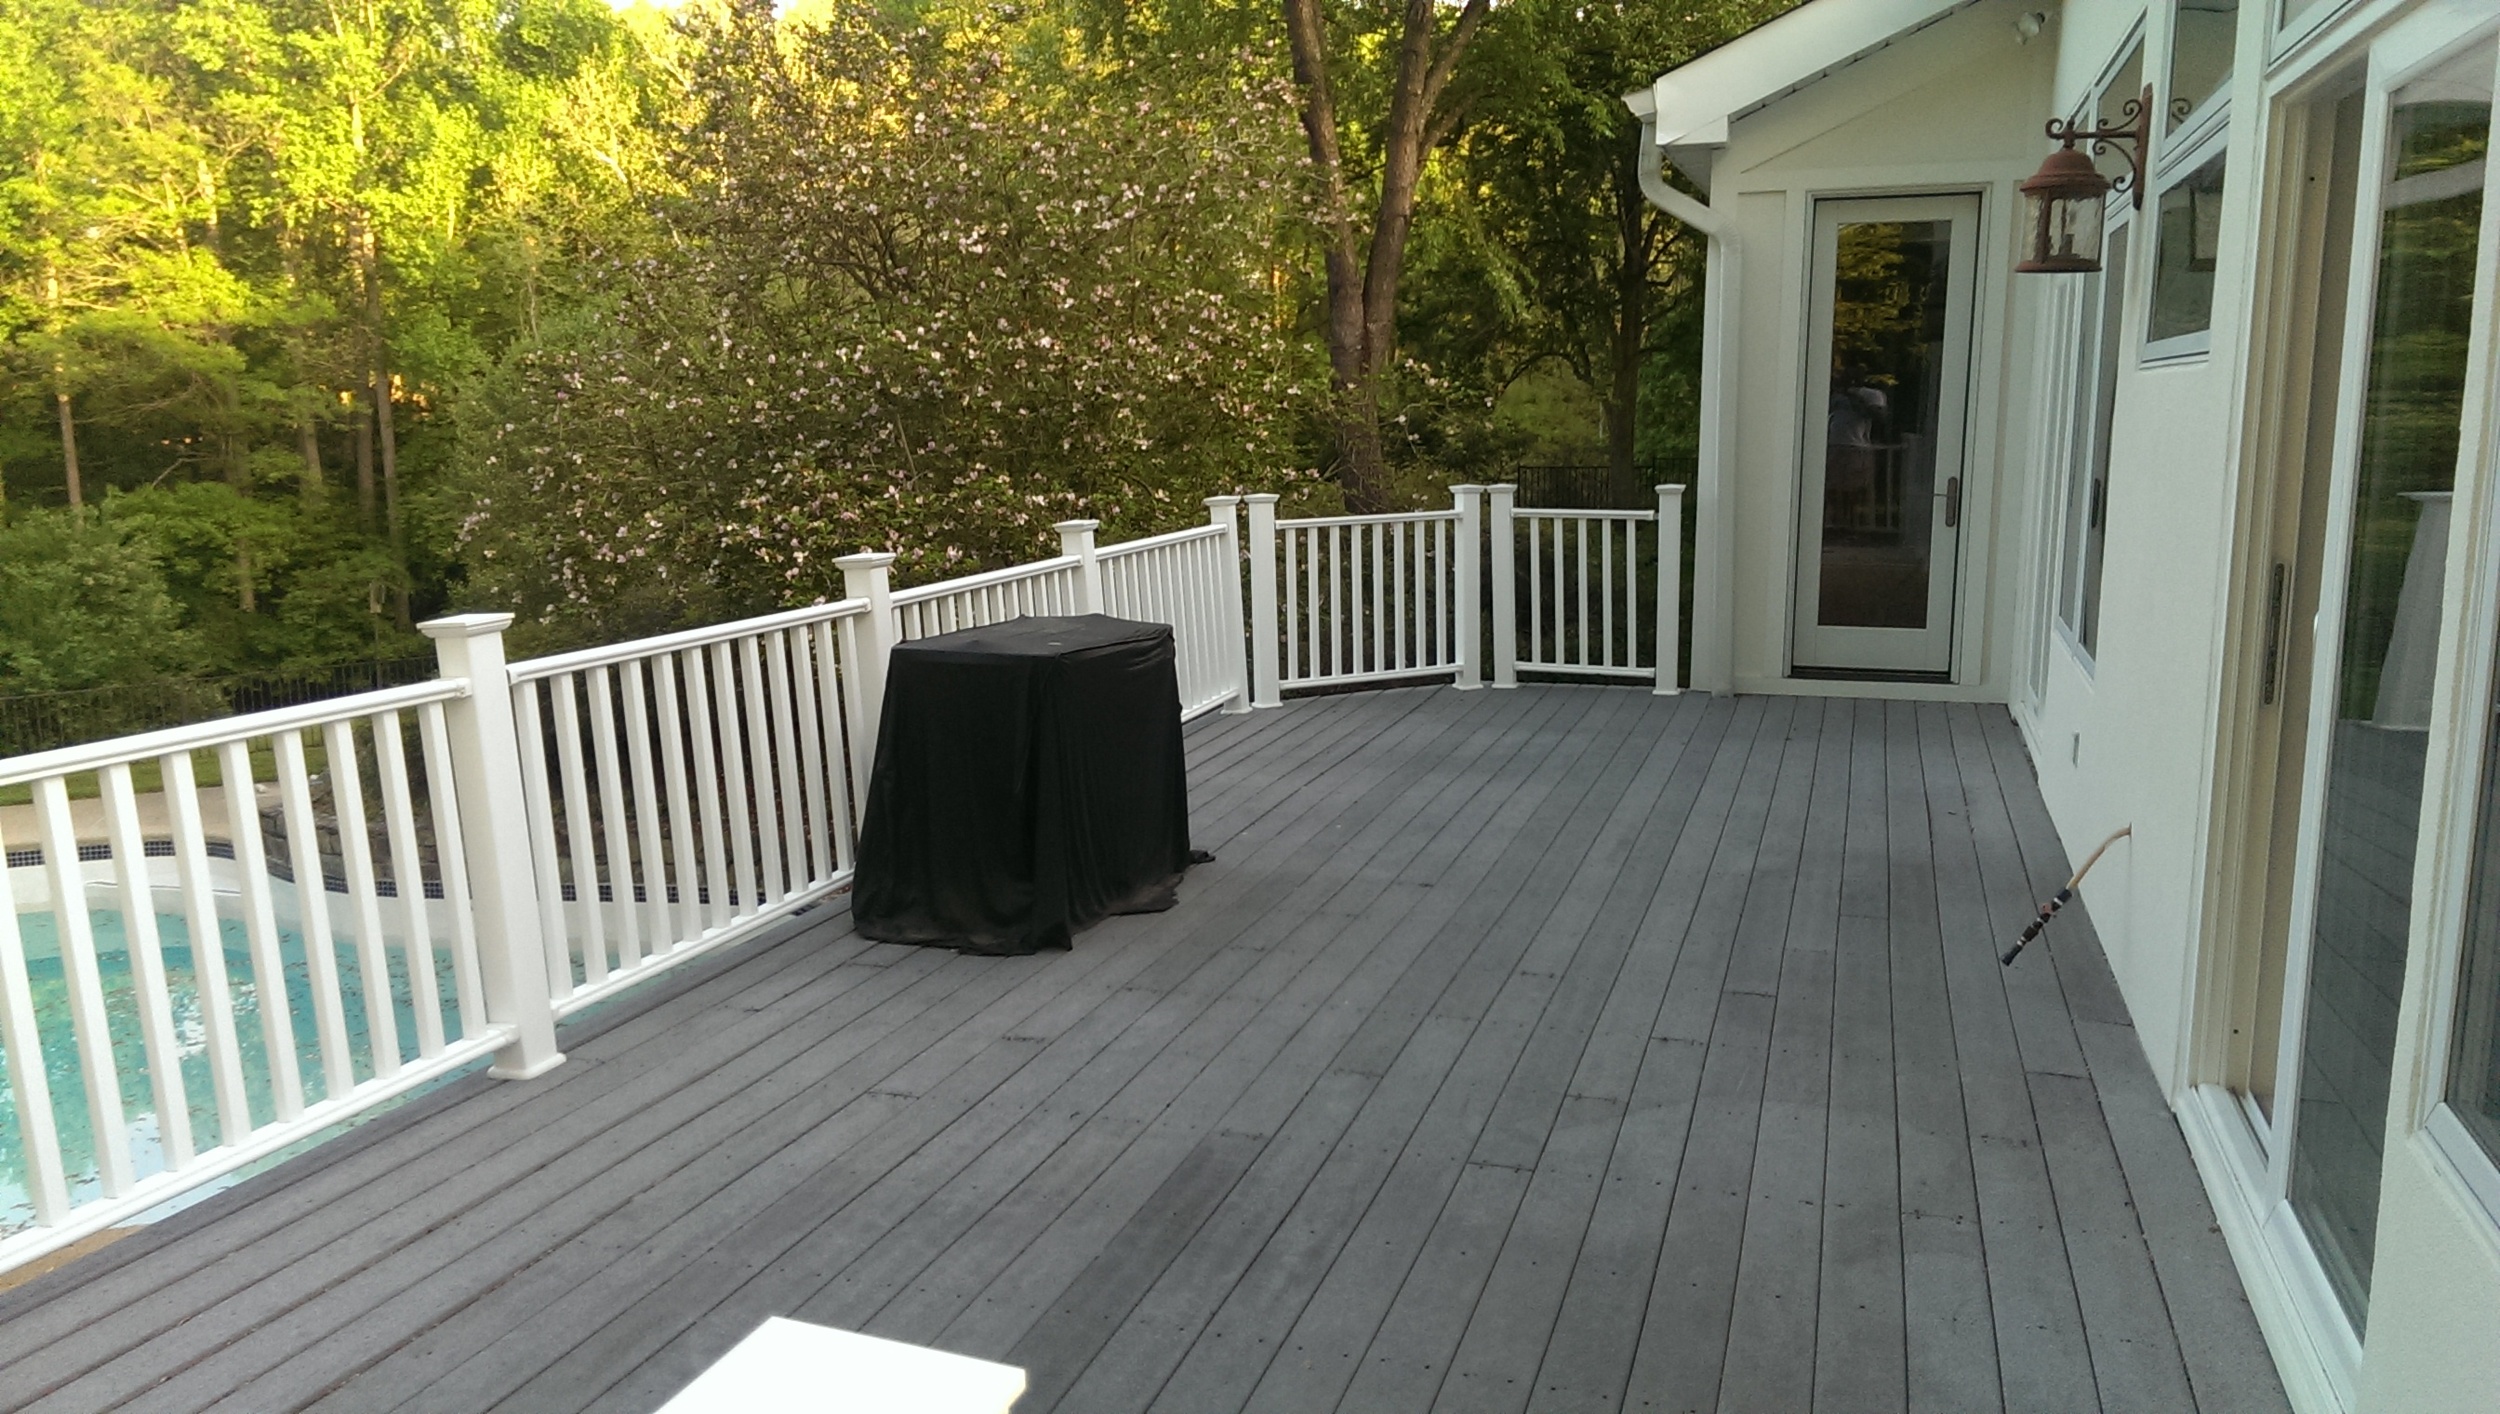 We dimension all exterior surfaces including decks and patios. 